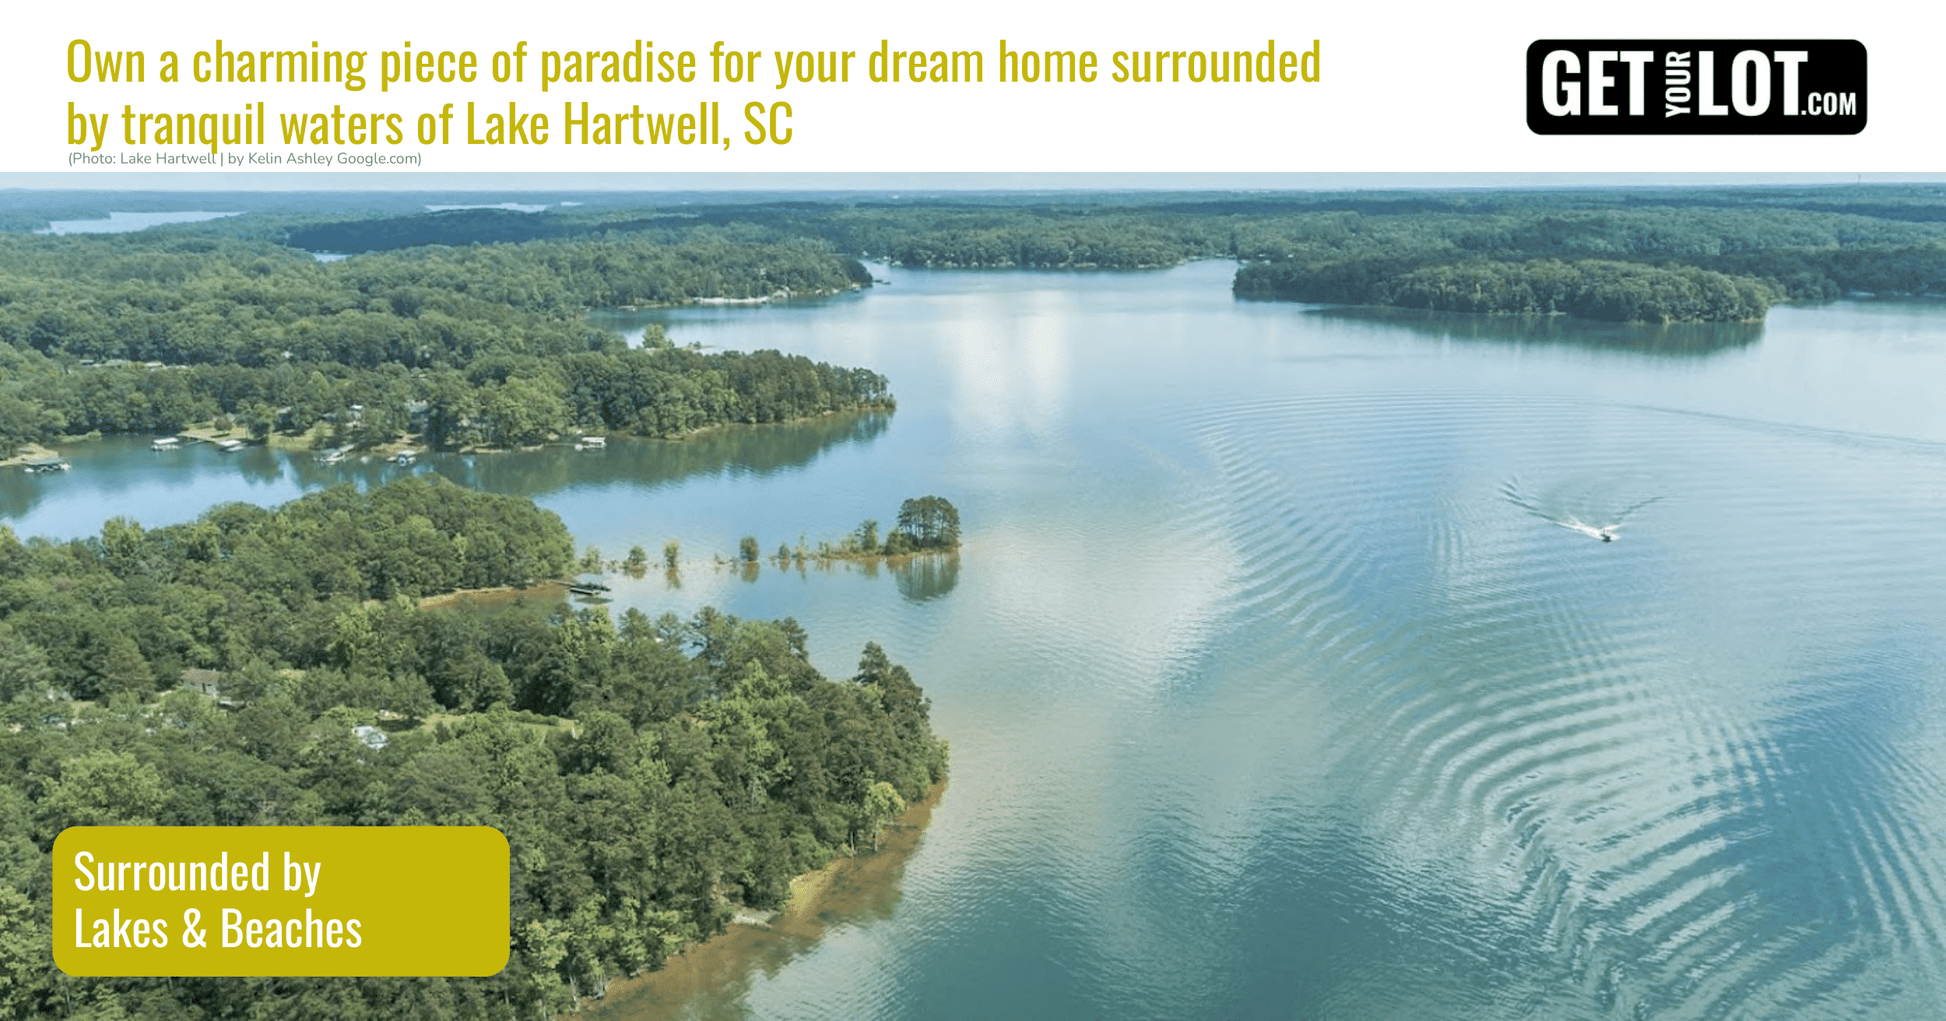 Own a charming piece of paradise for your dream home surrounded by tranquil waters of Lake Hartwell, SC